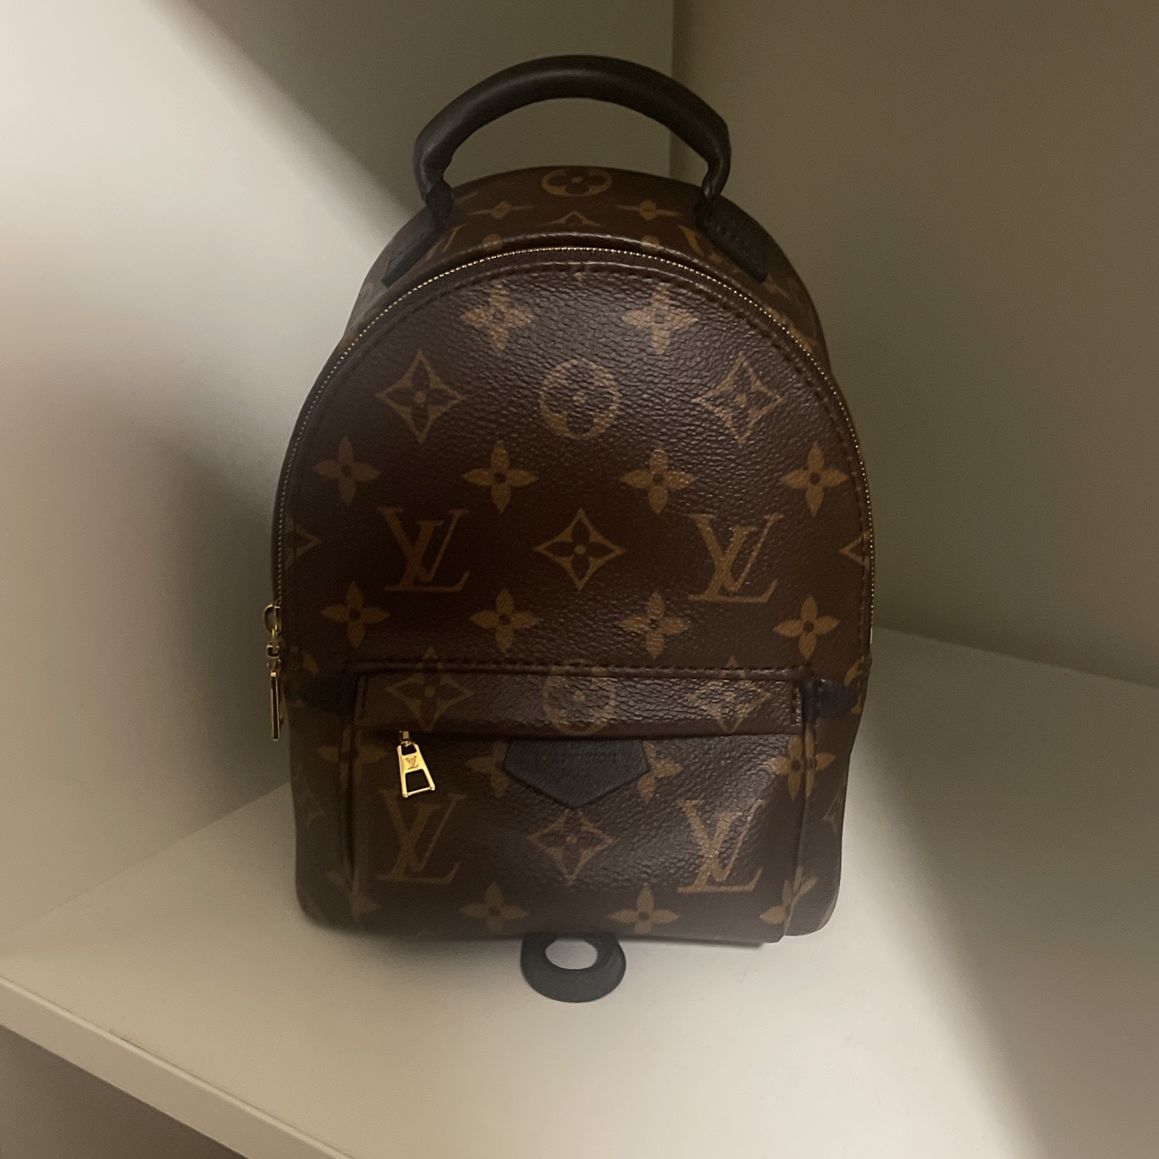 Louis Vuitton artistry bag for Sale in Gulfport, FL - OfferUp